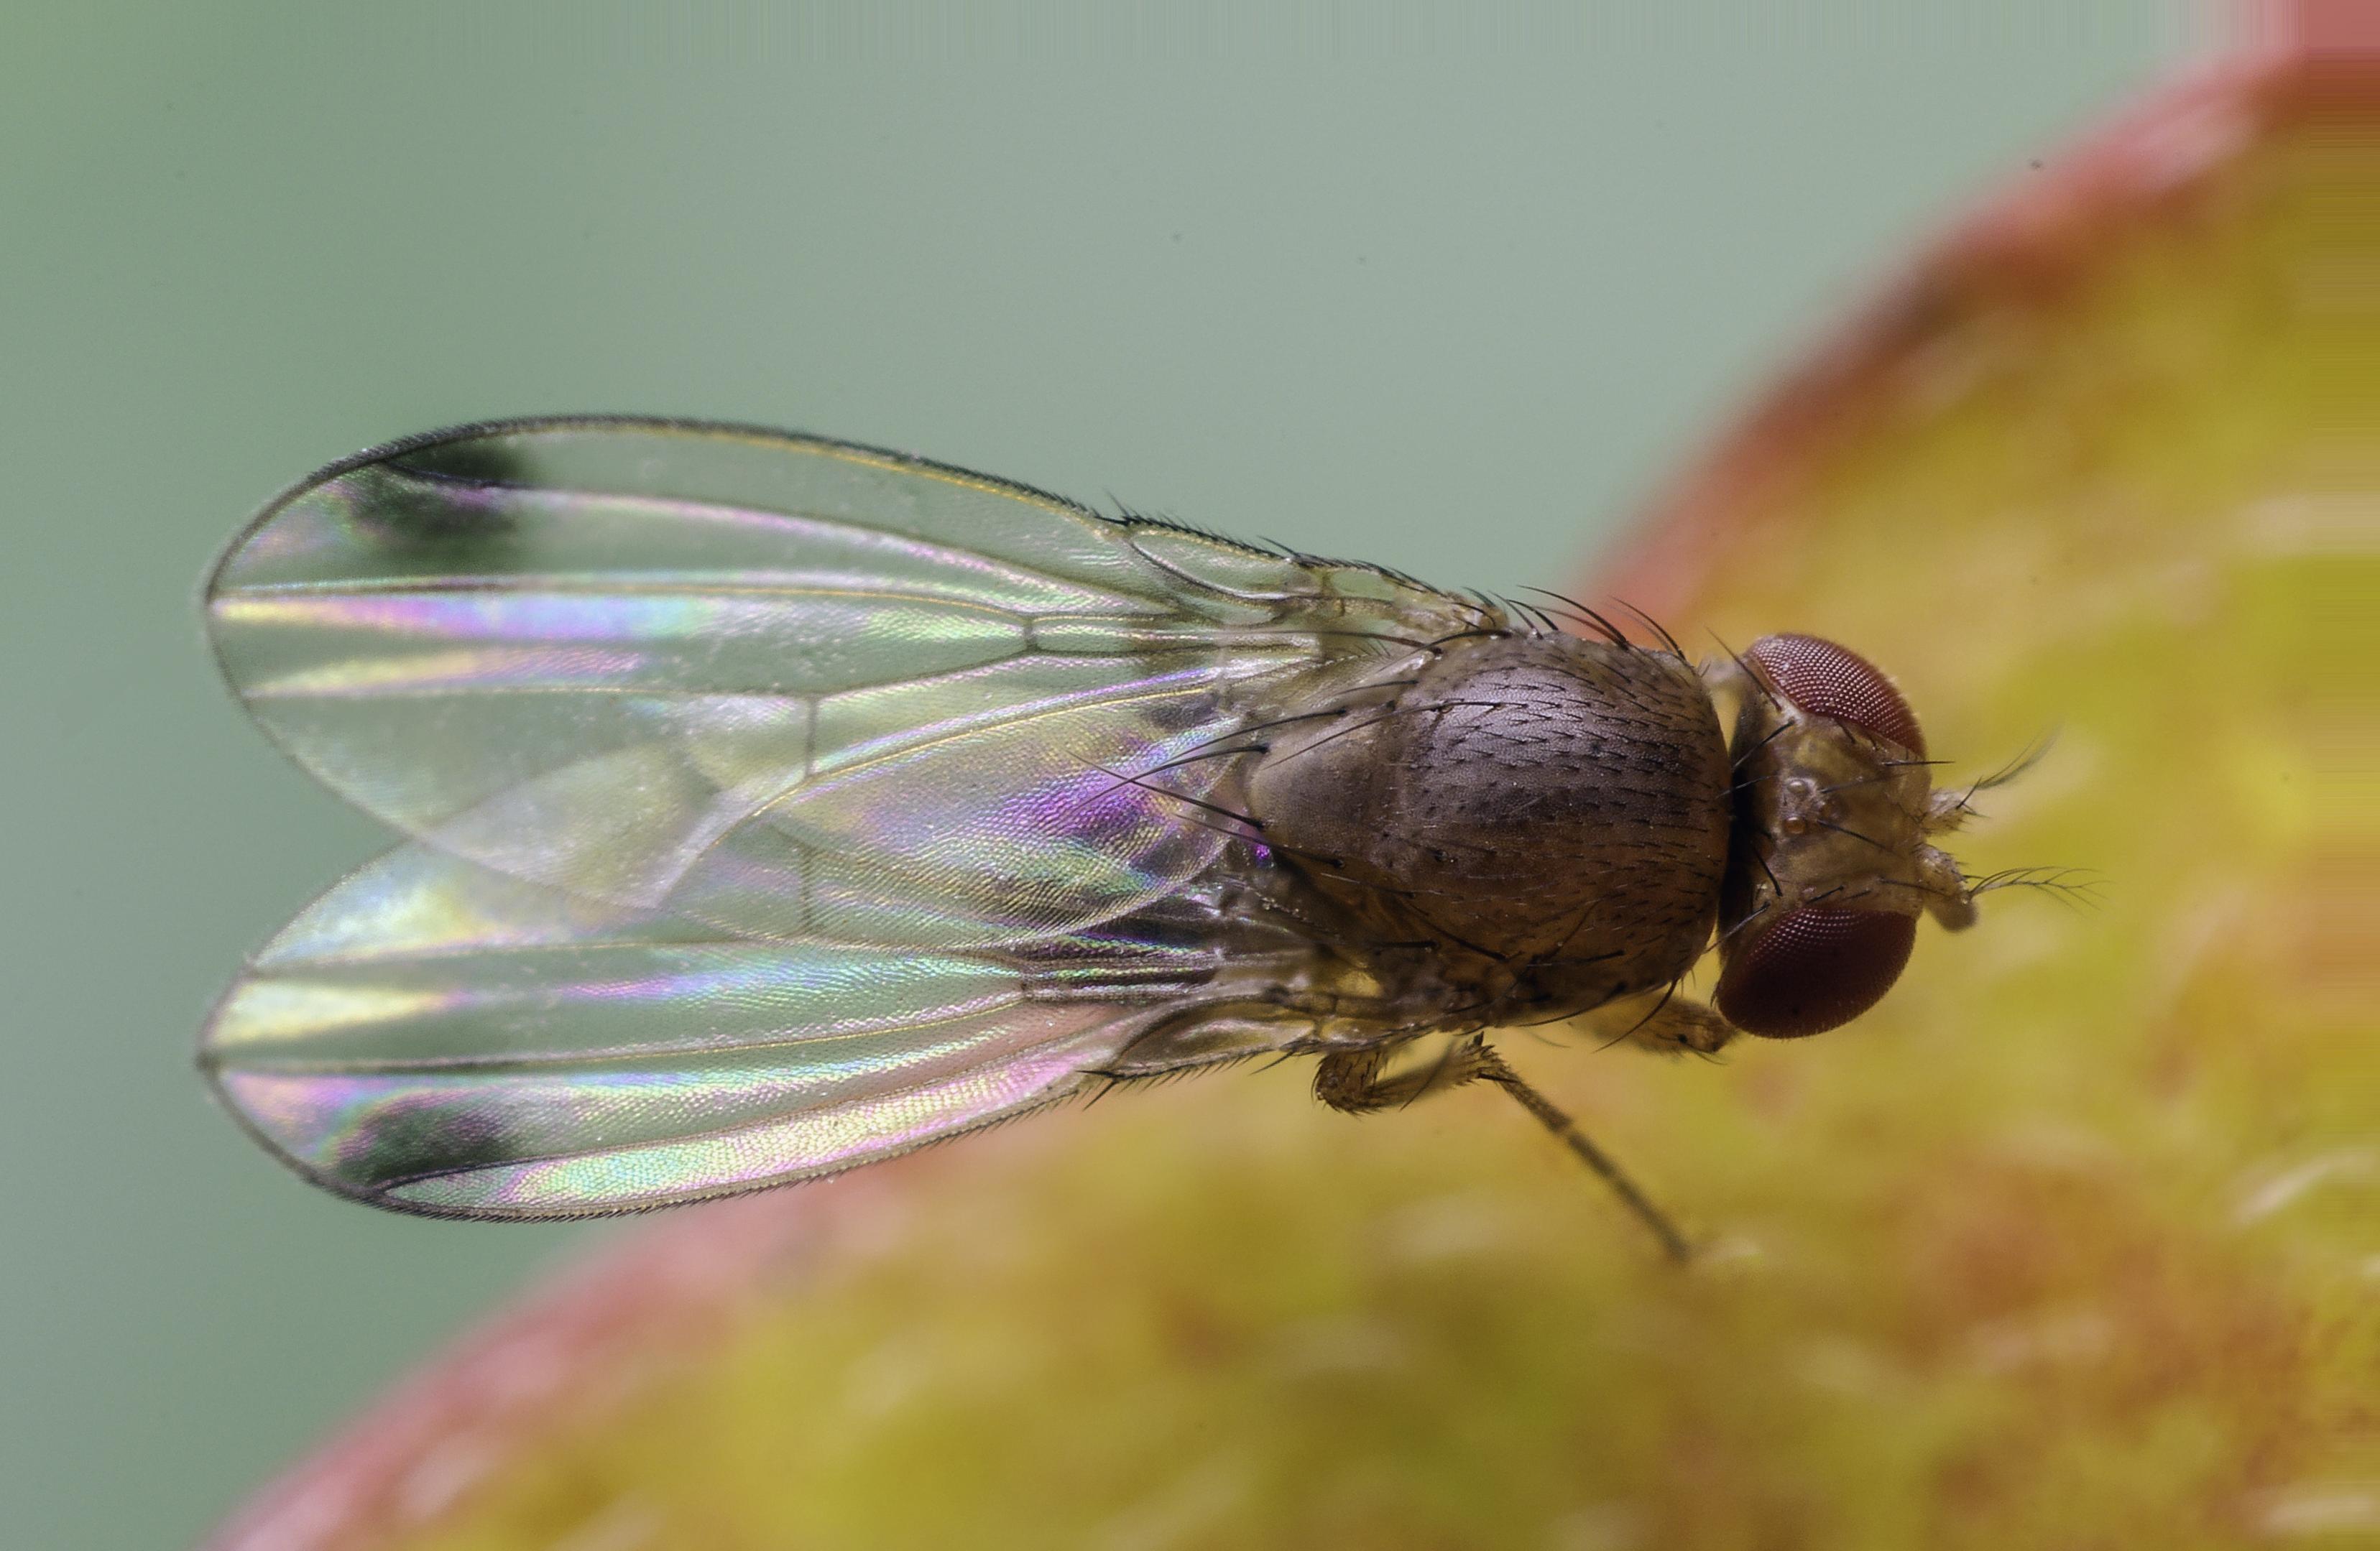 Studies from California reveal some problems with insecticide resistance of Drosophila suzukii